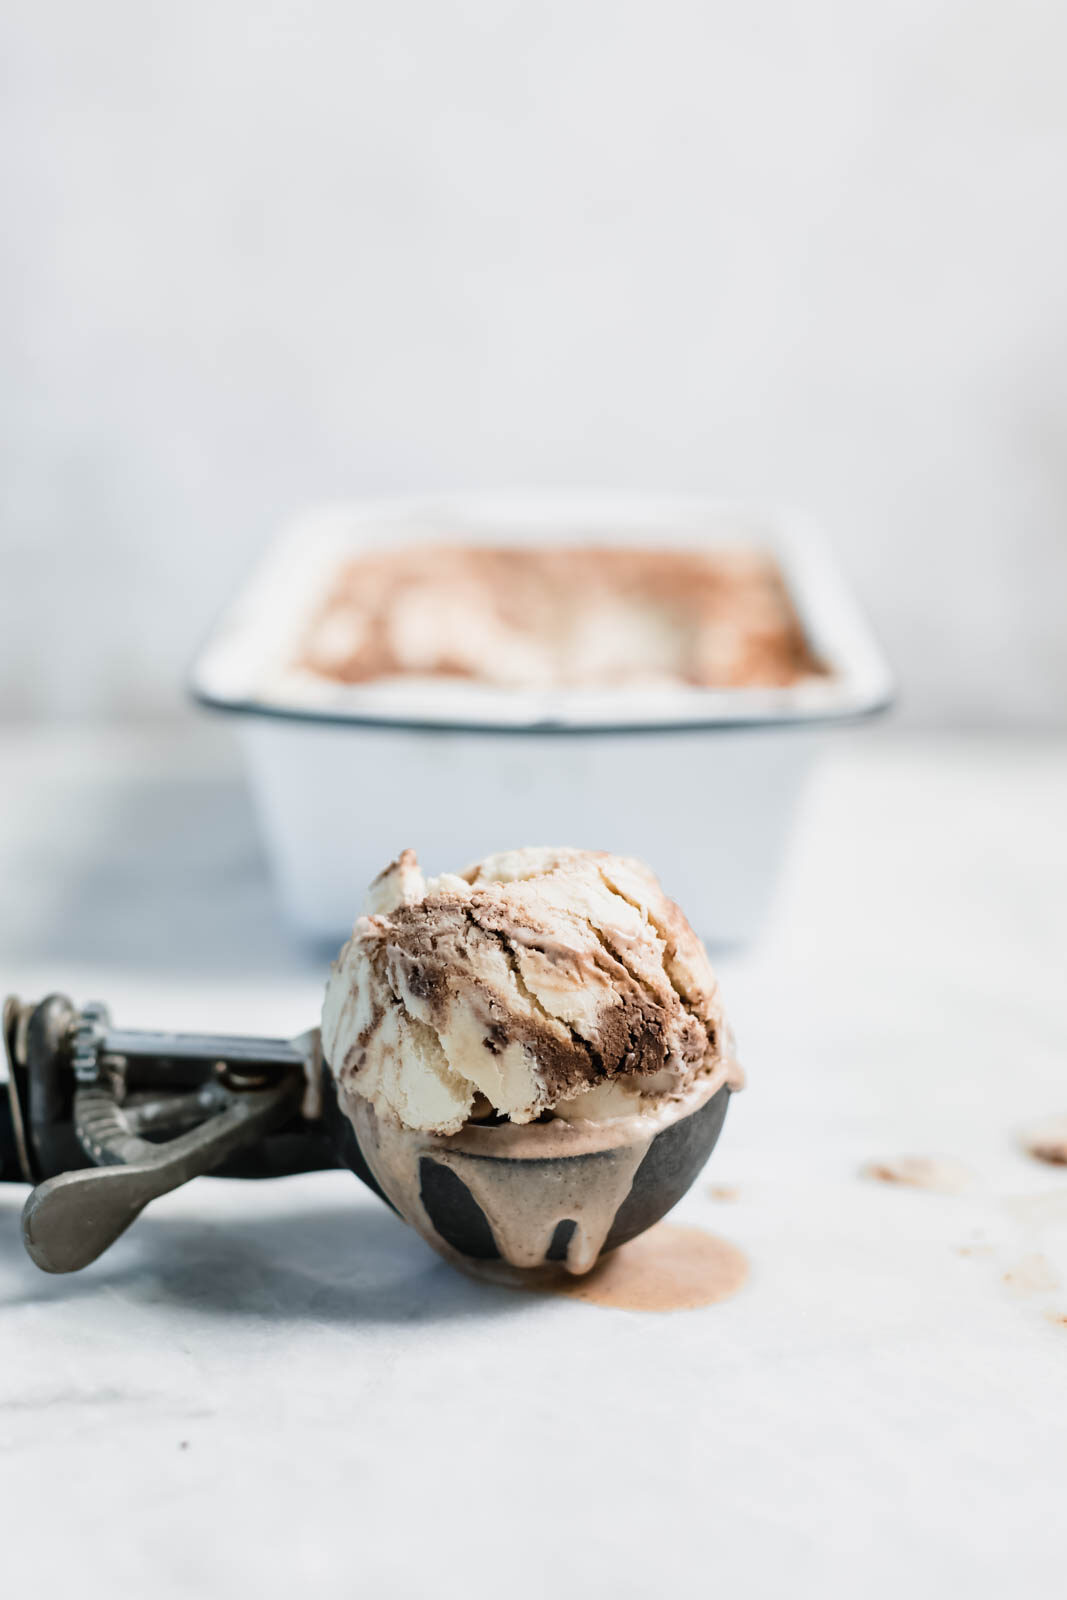 A creamy, dreamy vegan peanut butter ice cream made with coconut cream and swirled with chocolate ganache and graham crackers!